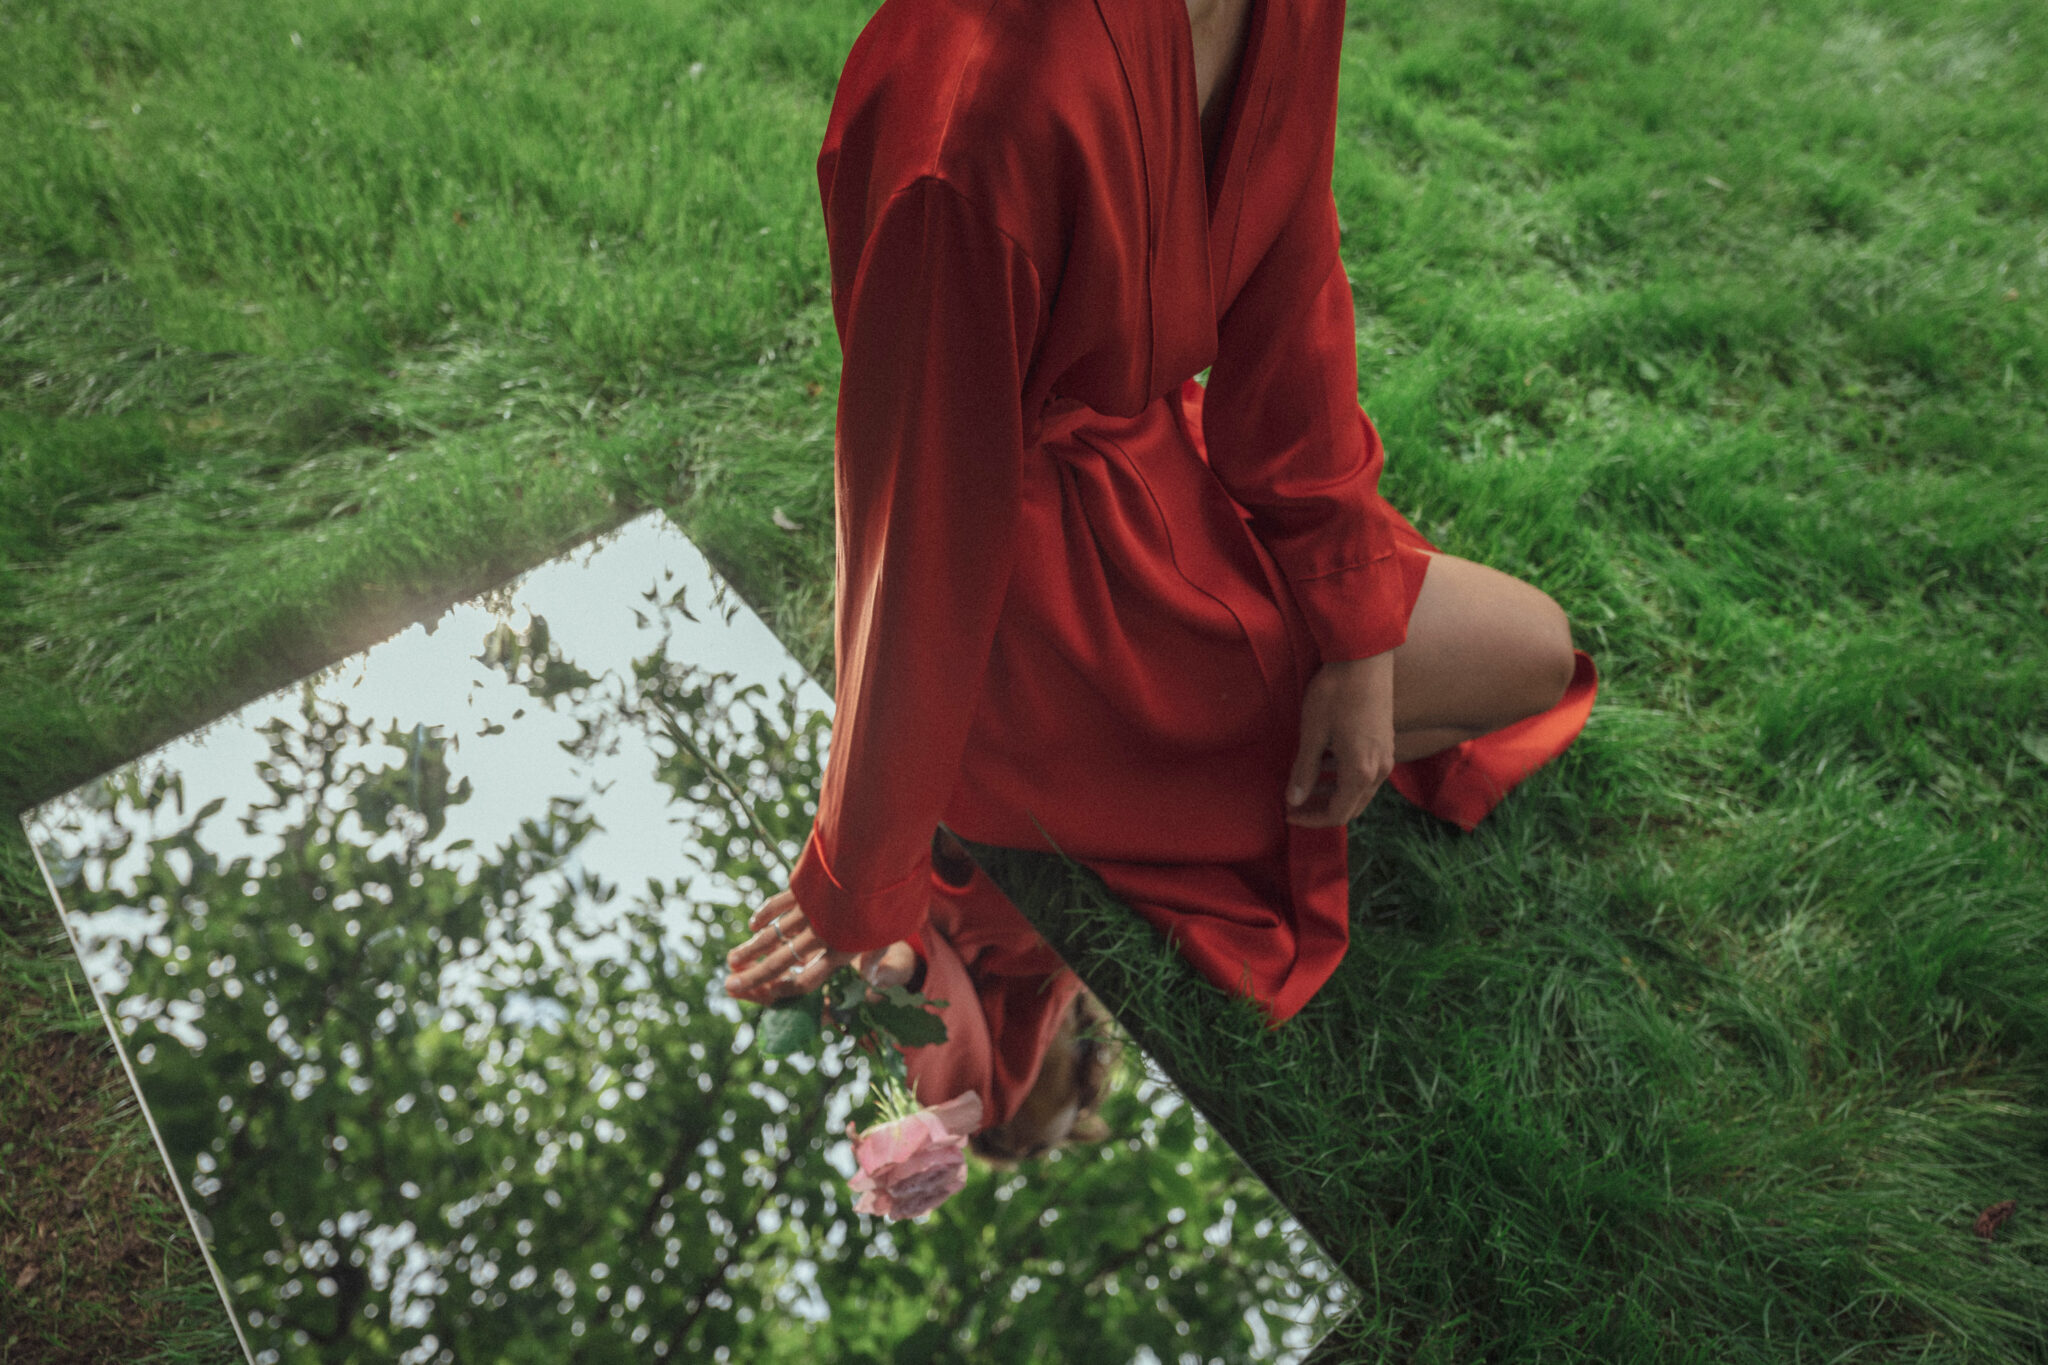 Girl laying on mirror in an orange robe in grass